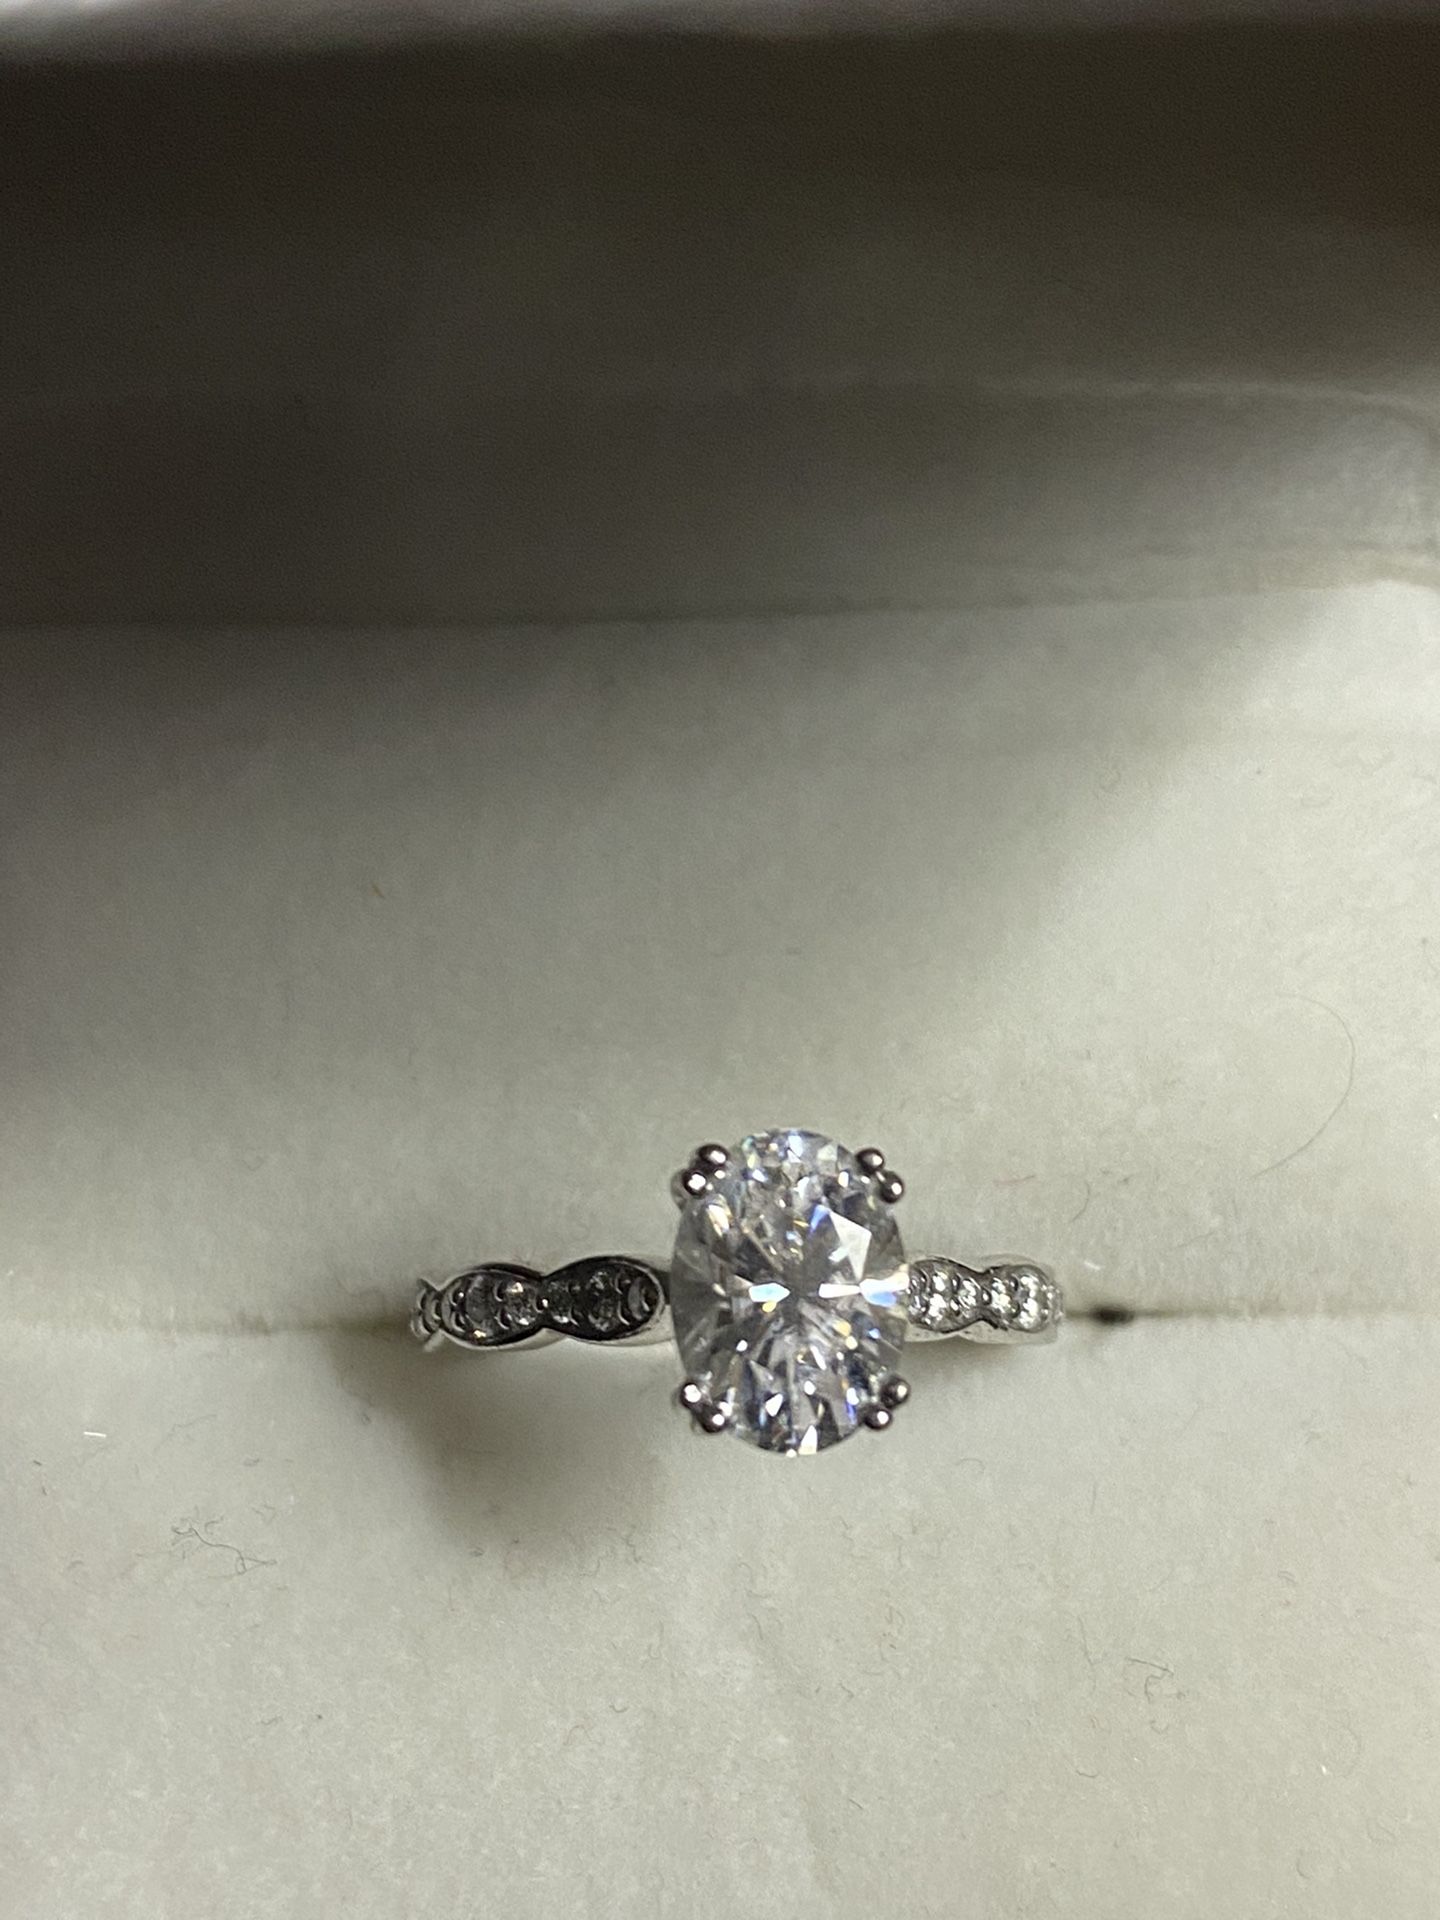 Engagement Ring: solid 14K white gold. SIZE 5